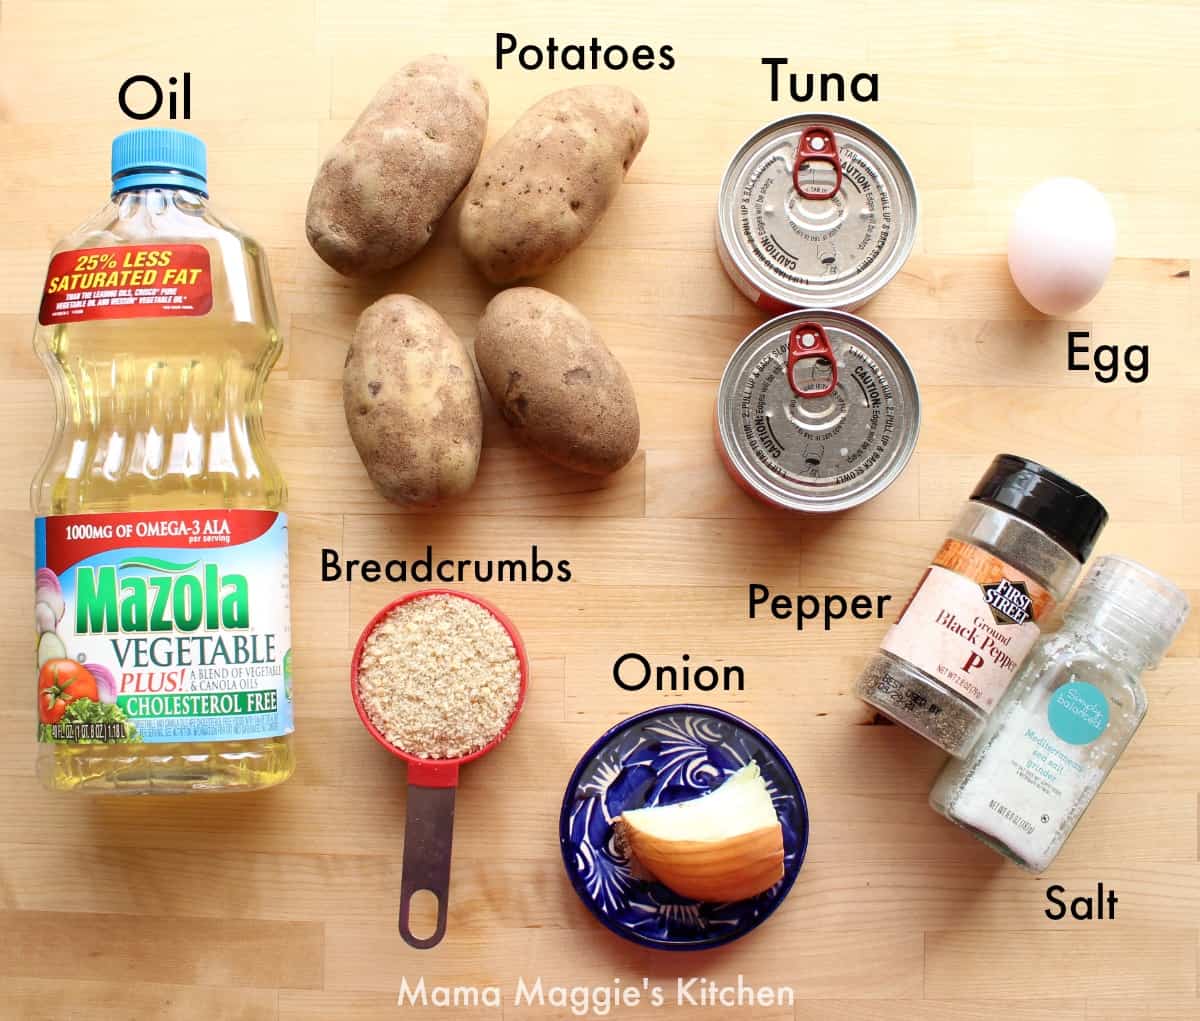 The ingredients for Tortitas de Papa con Atun on a wooden surface.